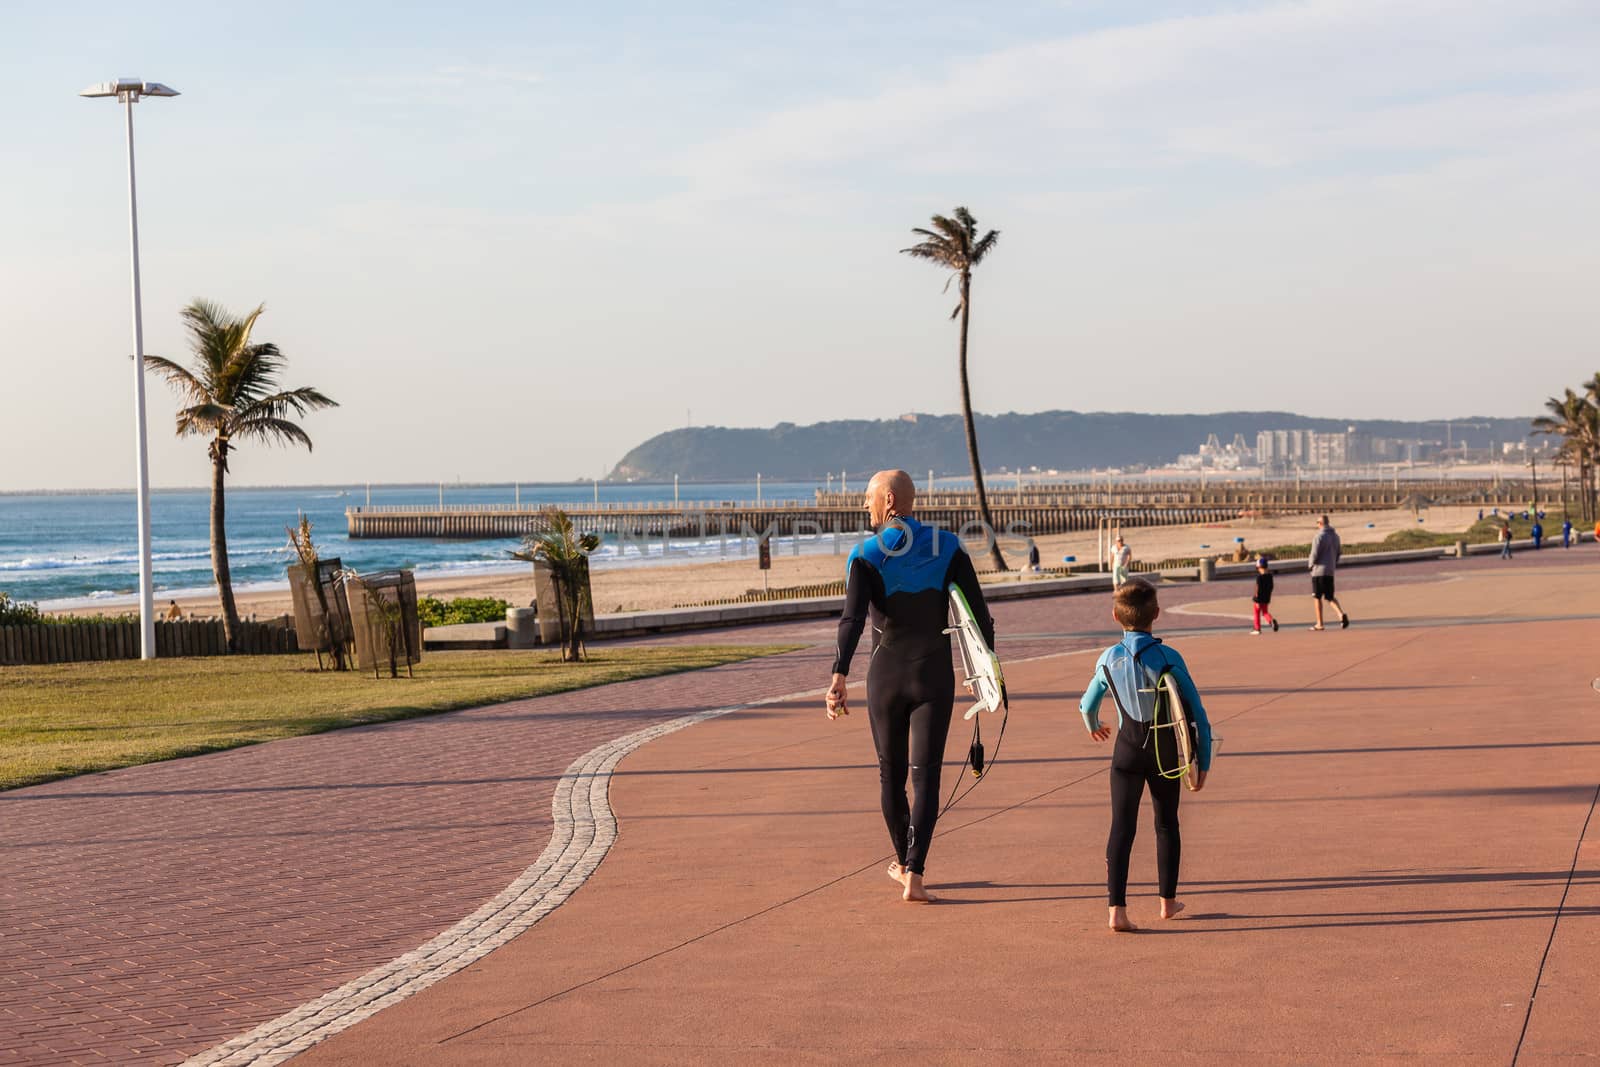 Surfers father and son going surfing at Durban  beach's South-Africa